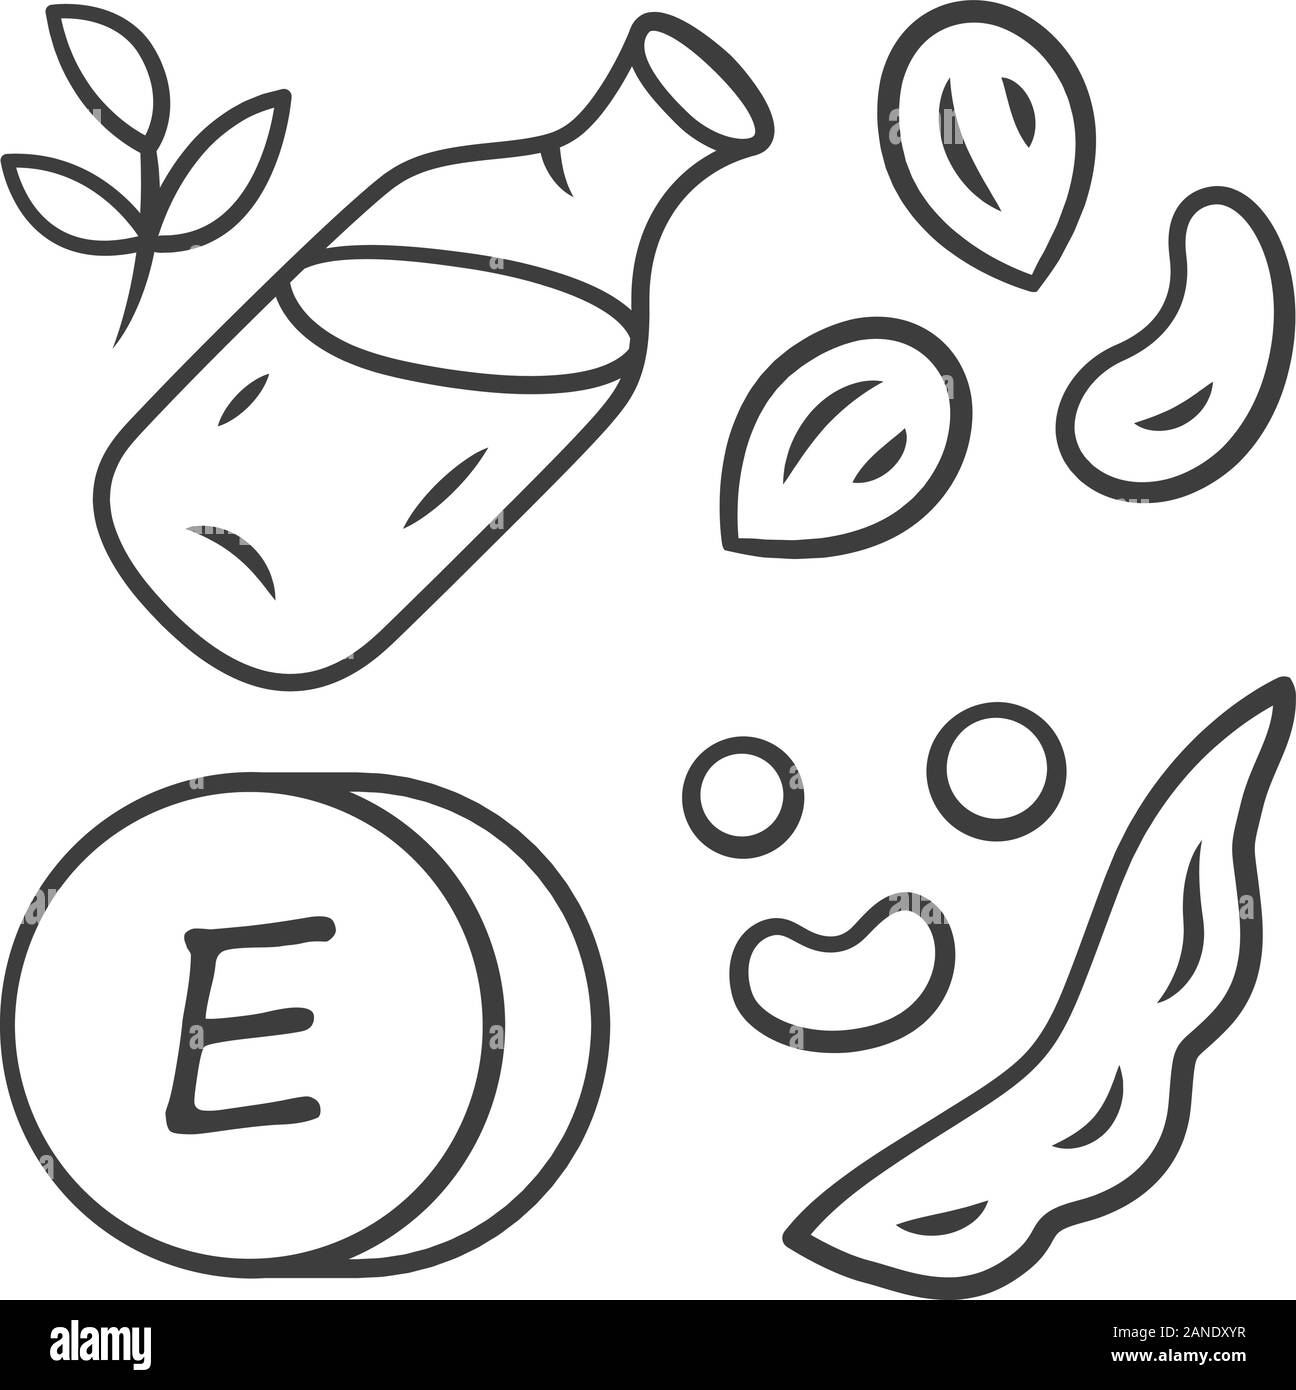 Vitamin E linear icon. Peanuts, peas and beans. Seed oil. Healthy diet. Tocopherol natural food source. Thin line illustration. Contour symbol. Vector Stock Vector